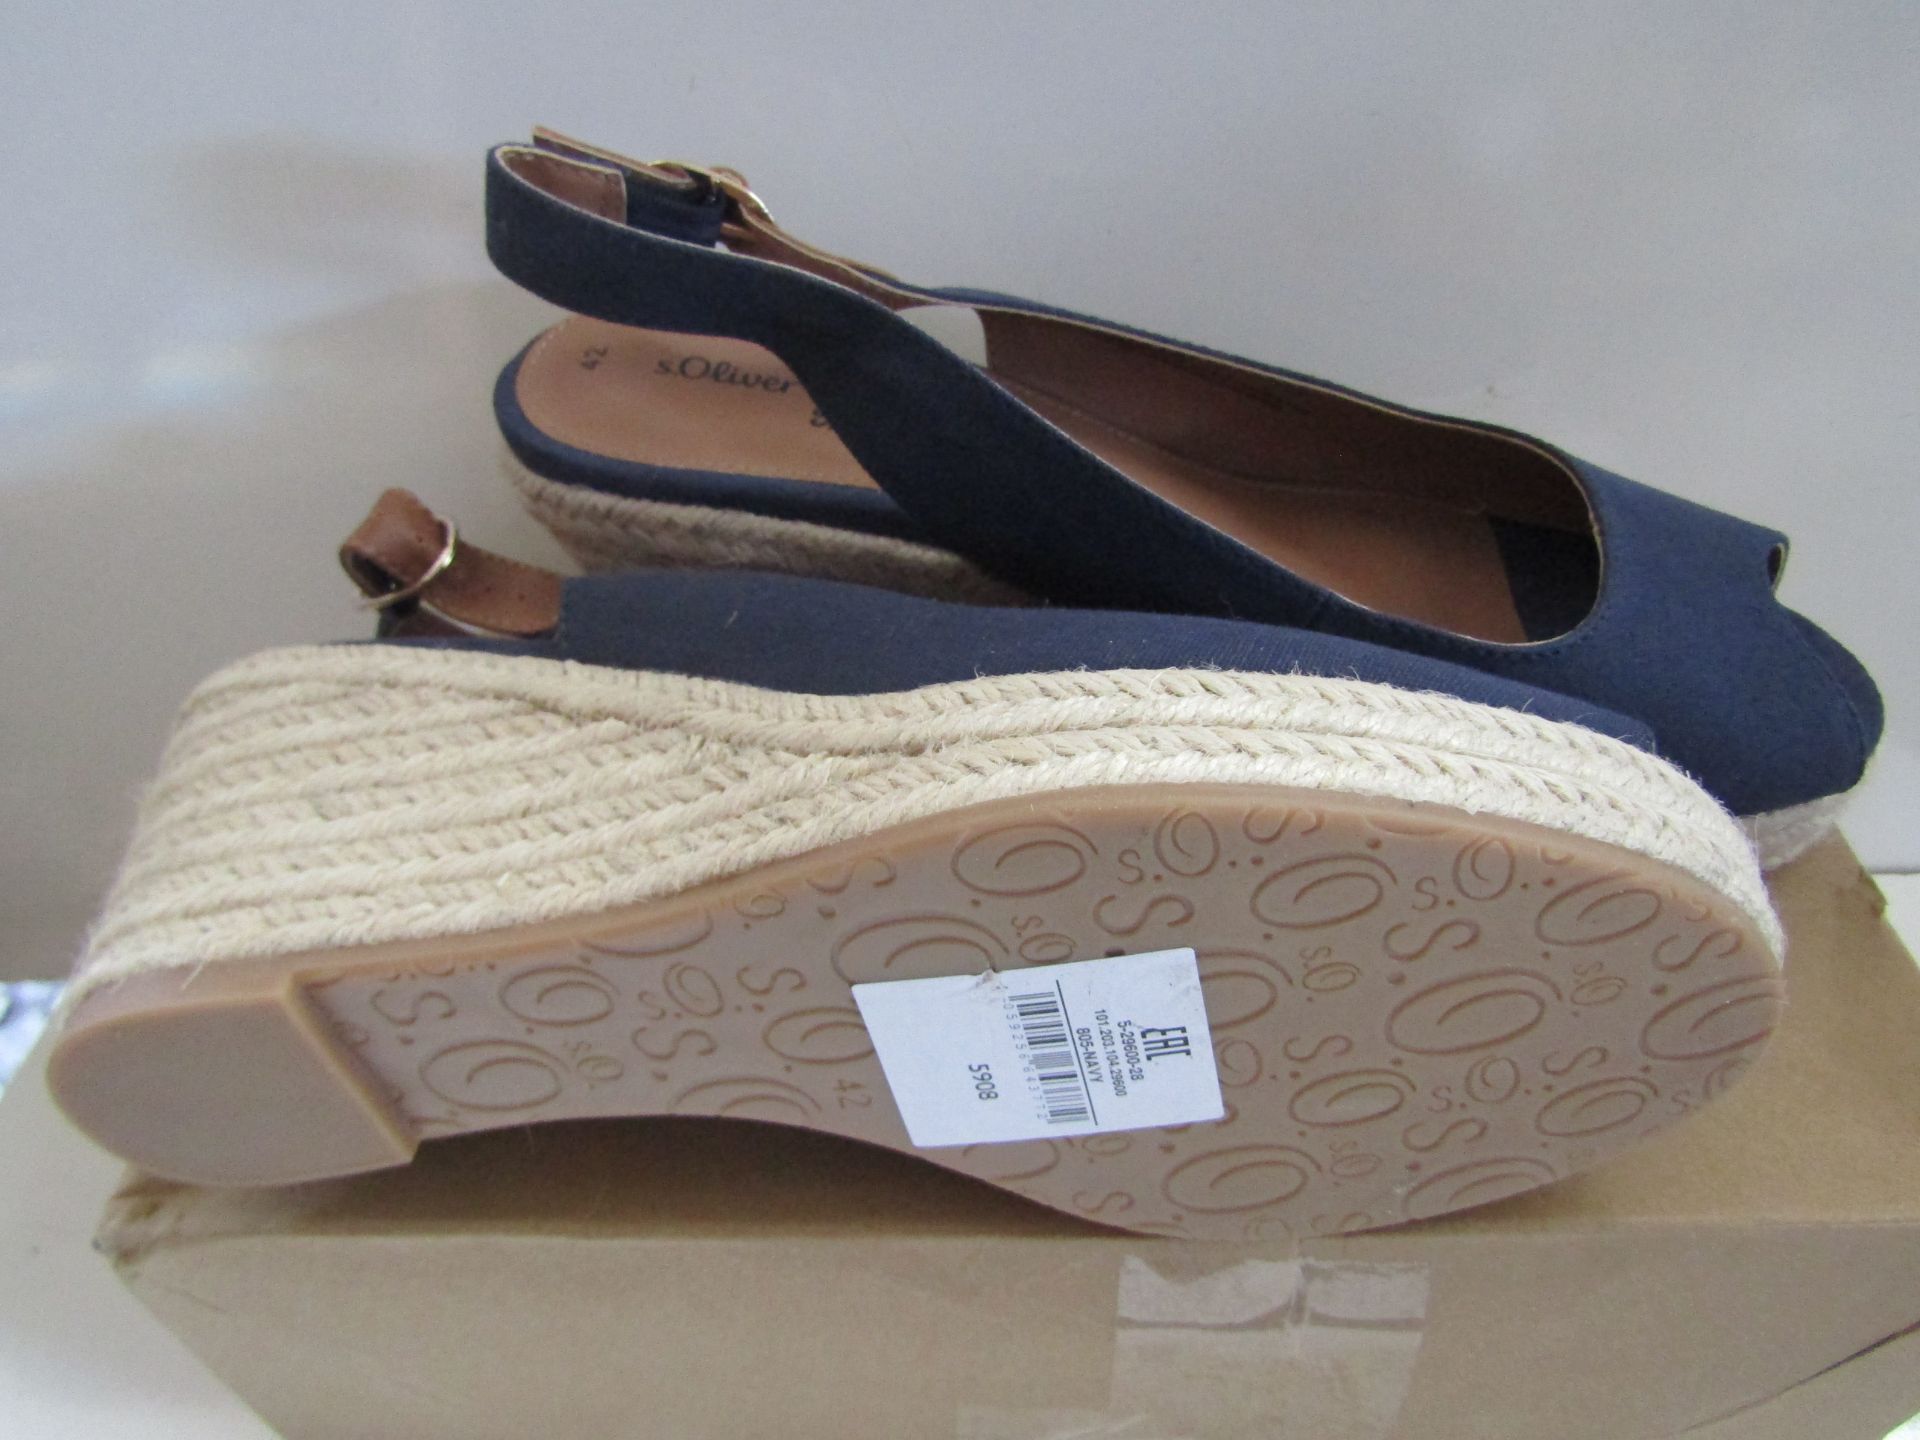 S.Oliver Wedge Shoe Navy Size 8 New & Boxed - Image 2 of 3